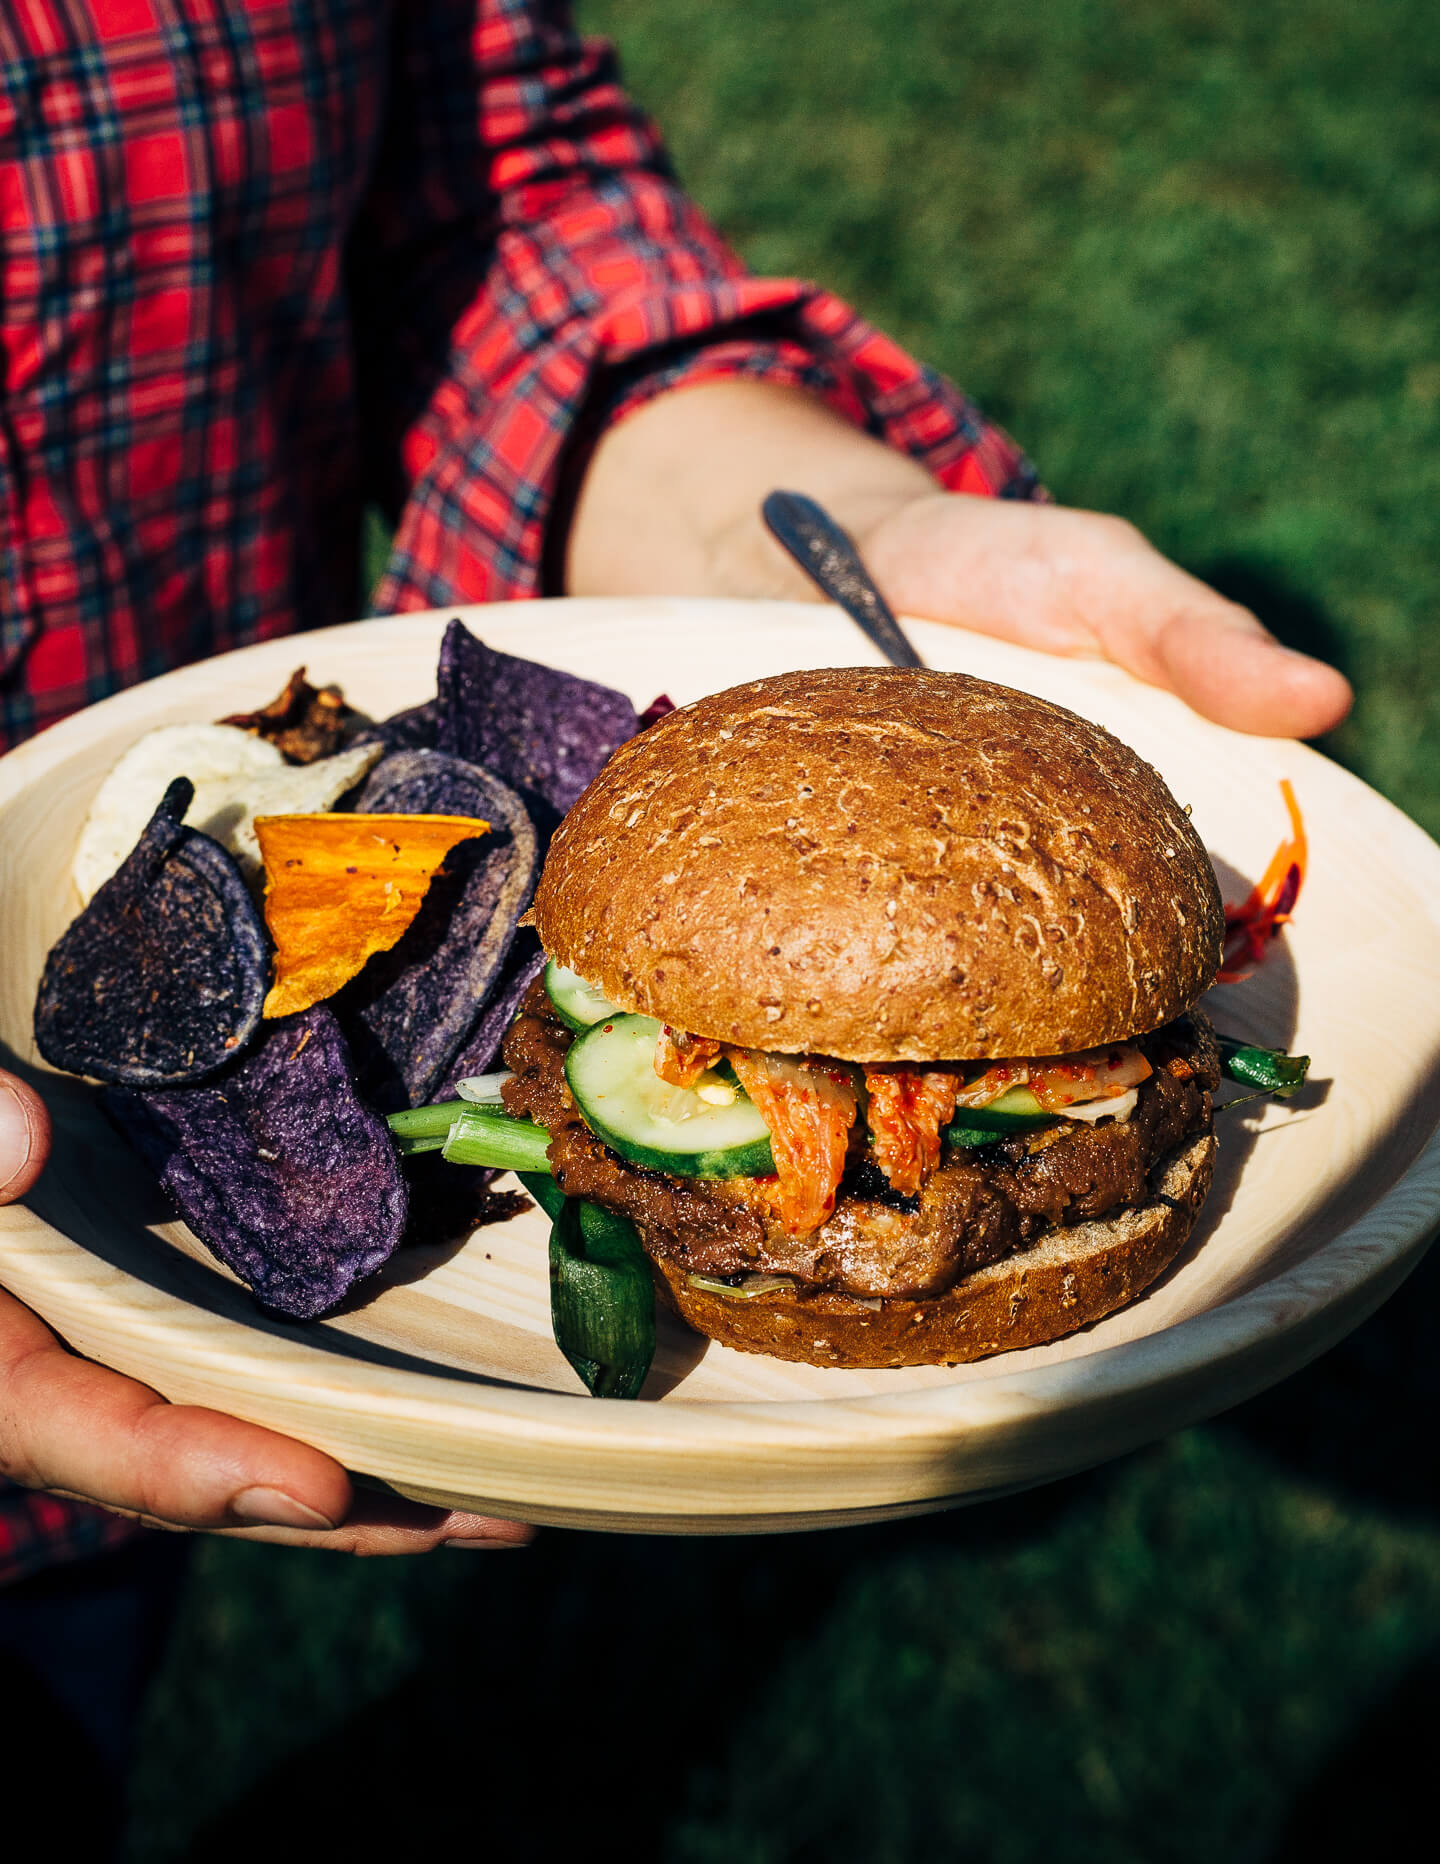 A fresh spin on the traditional tailgating party featuring plant-based kimchi burgers topped with grilled green onions and a spicy gochujang sunflower spread.